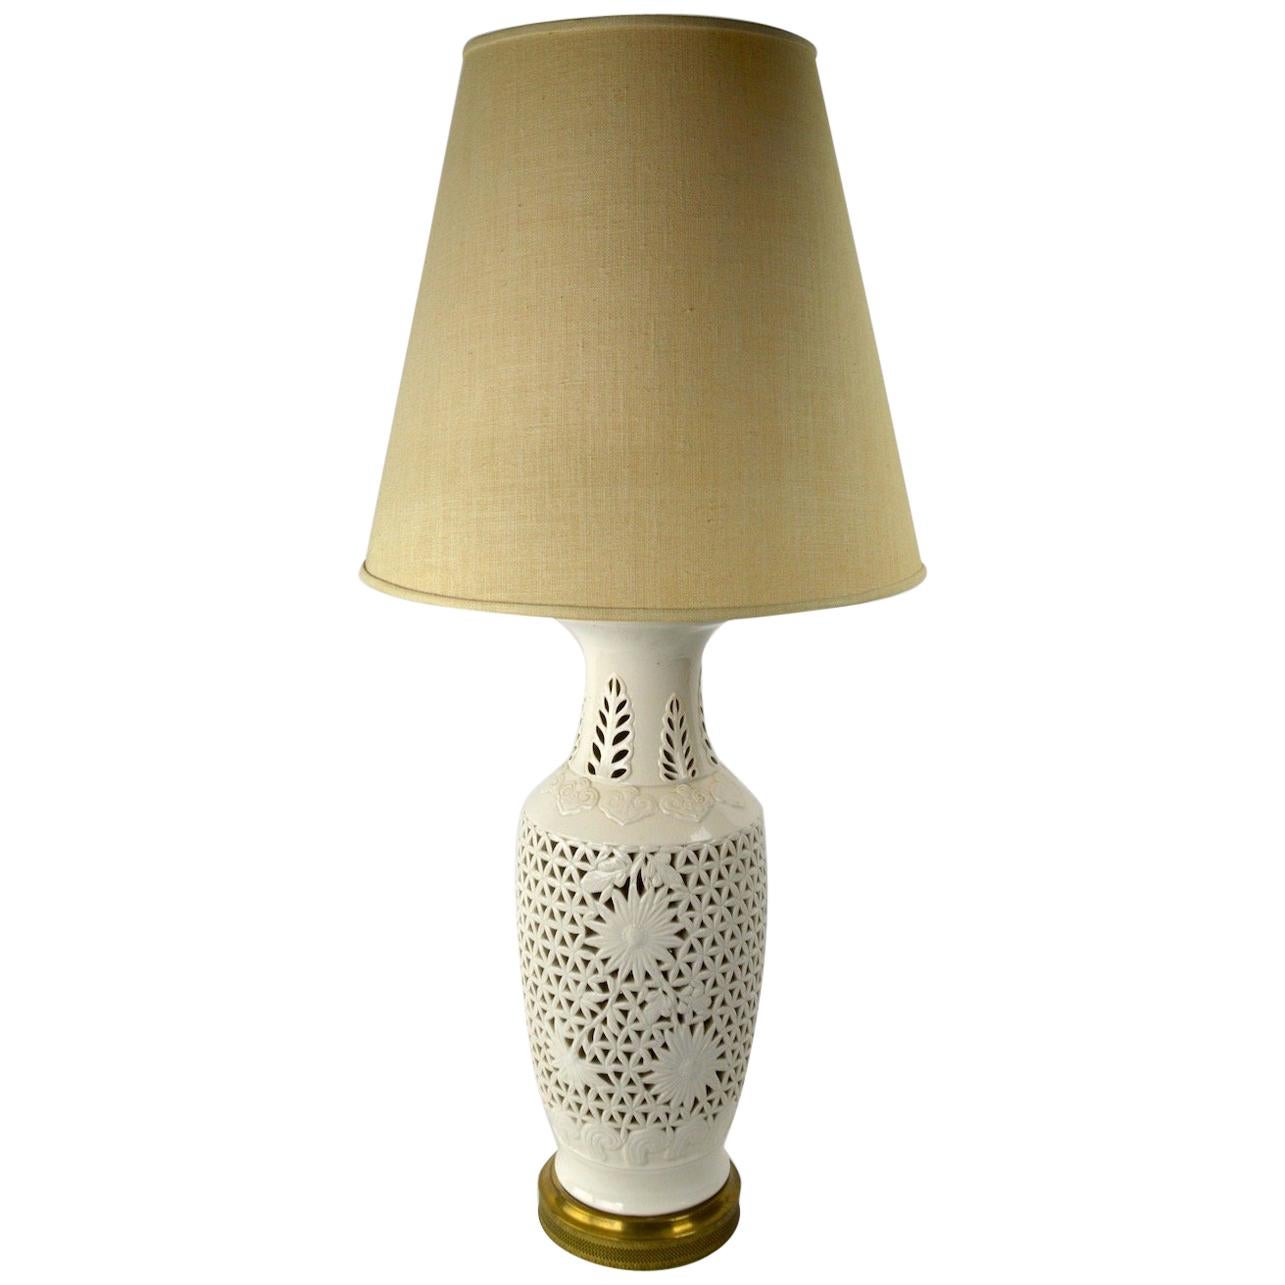 Reticulated Blanc de Chine Table Lamp